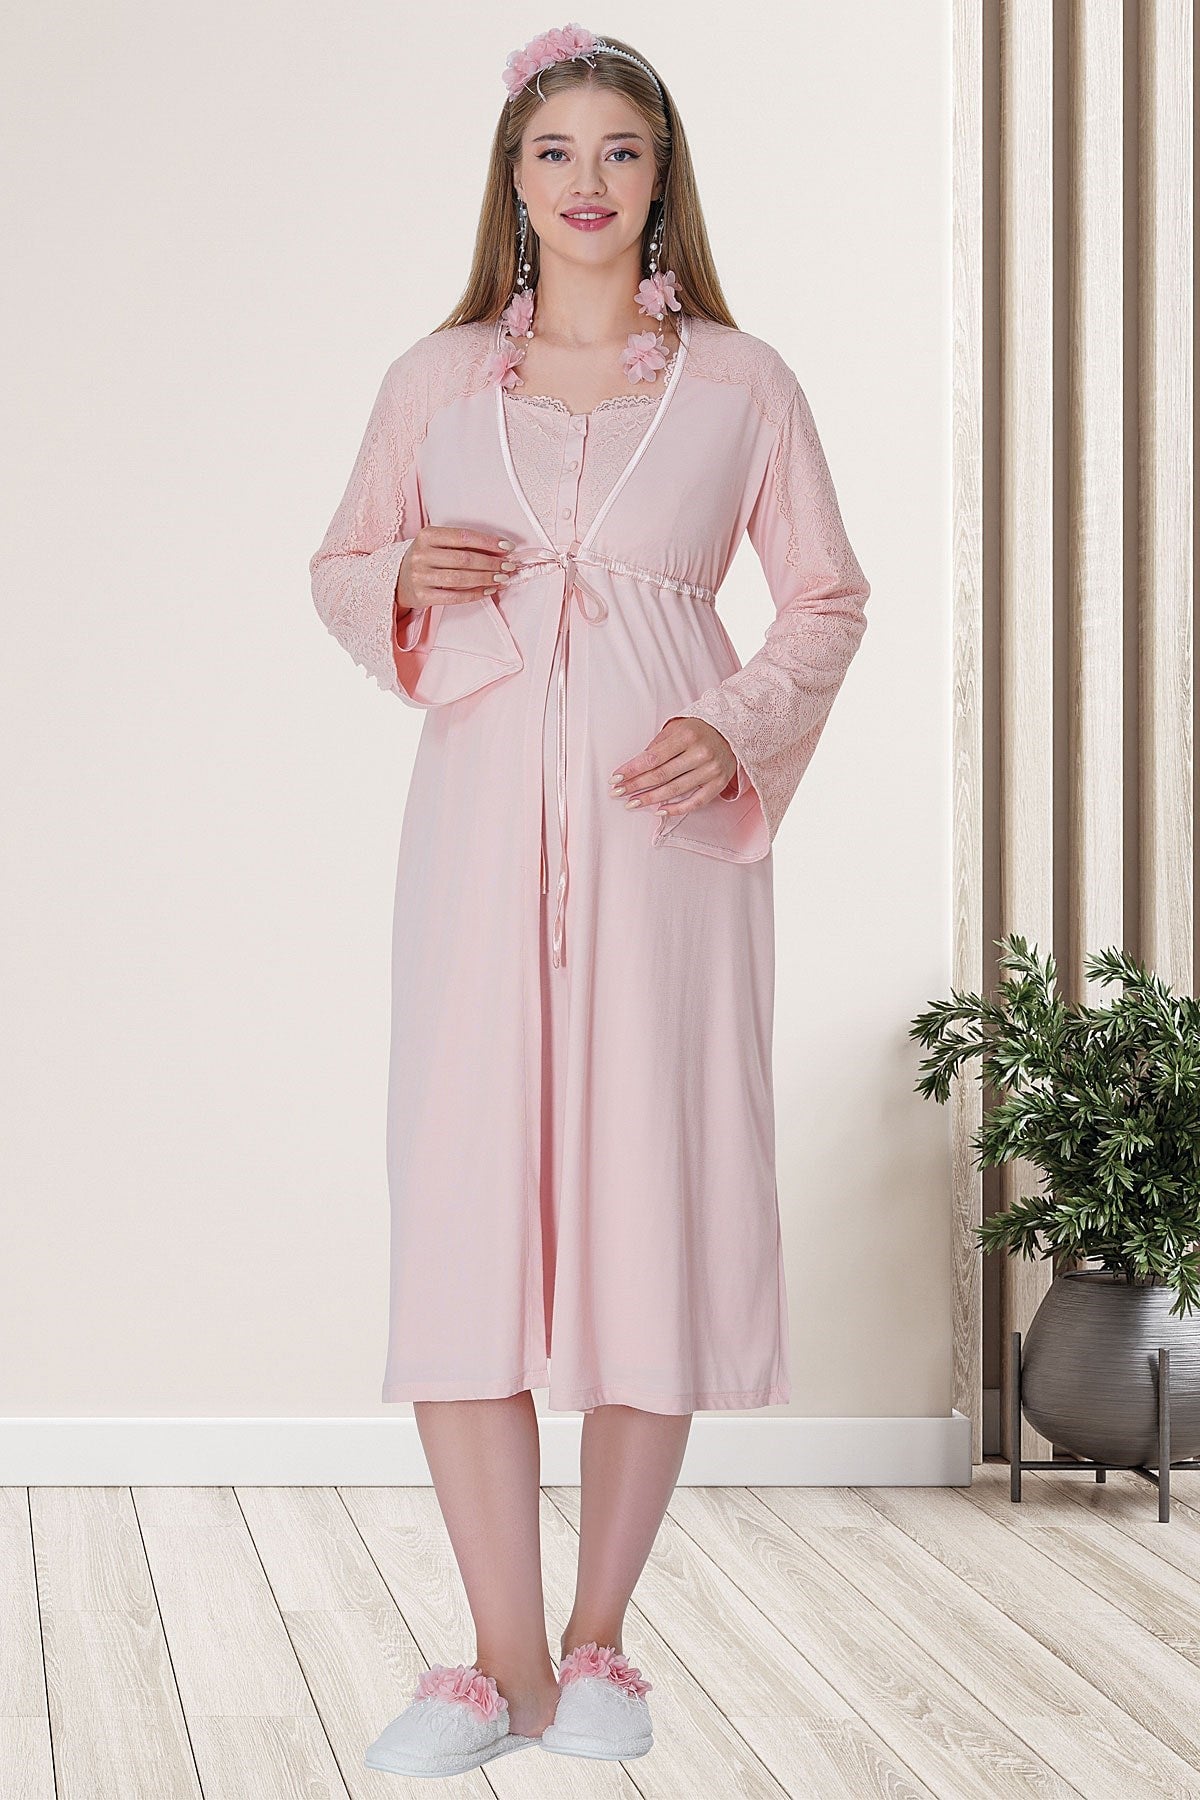 Shopymommy 5715 Lace Embroidered Maternity & Nursing Nightgown With Robe Powder